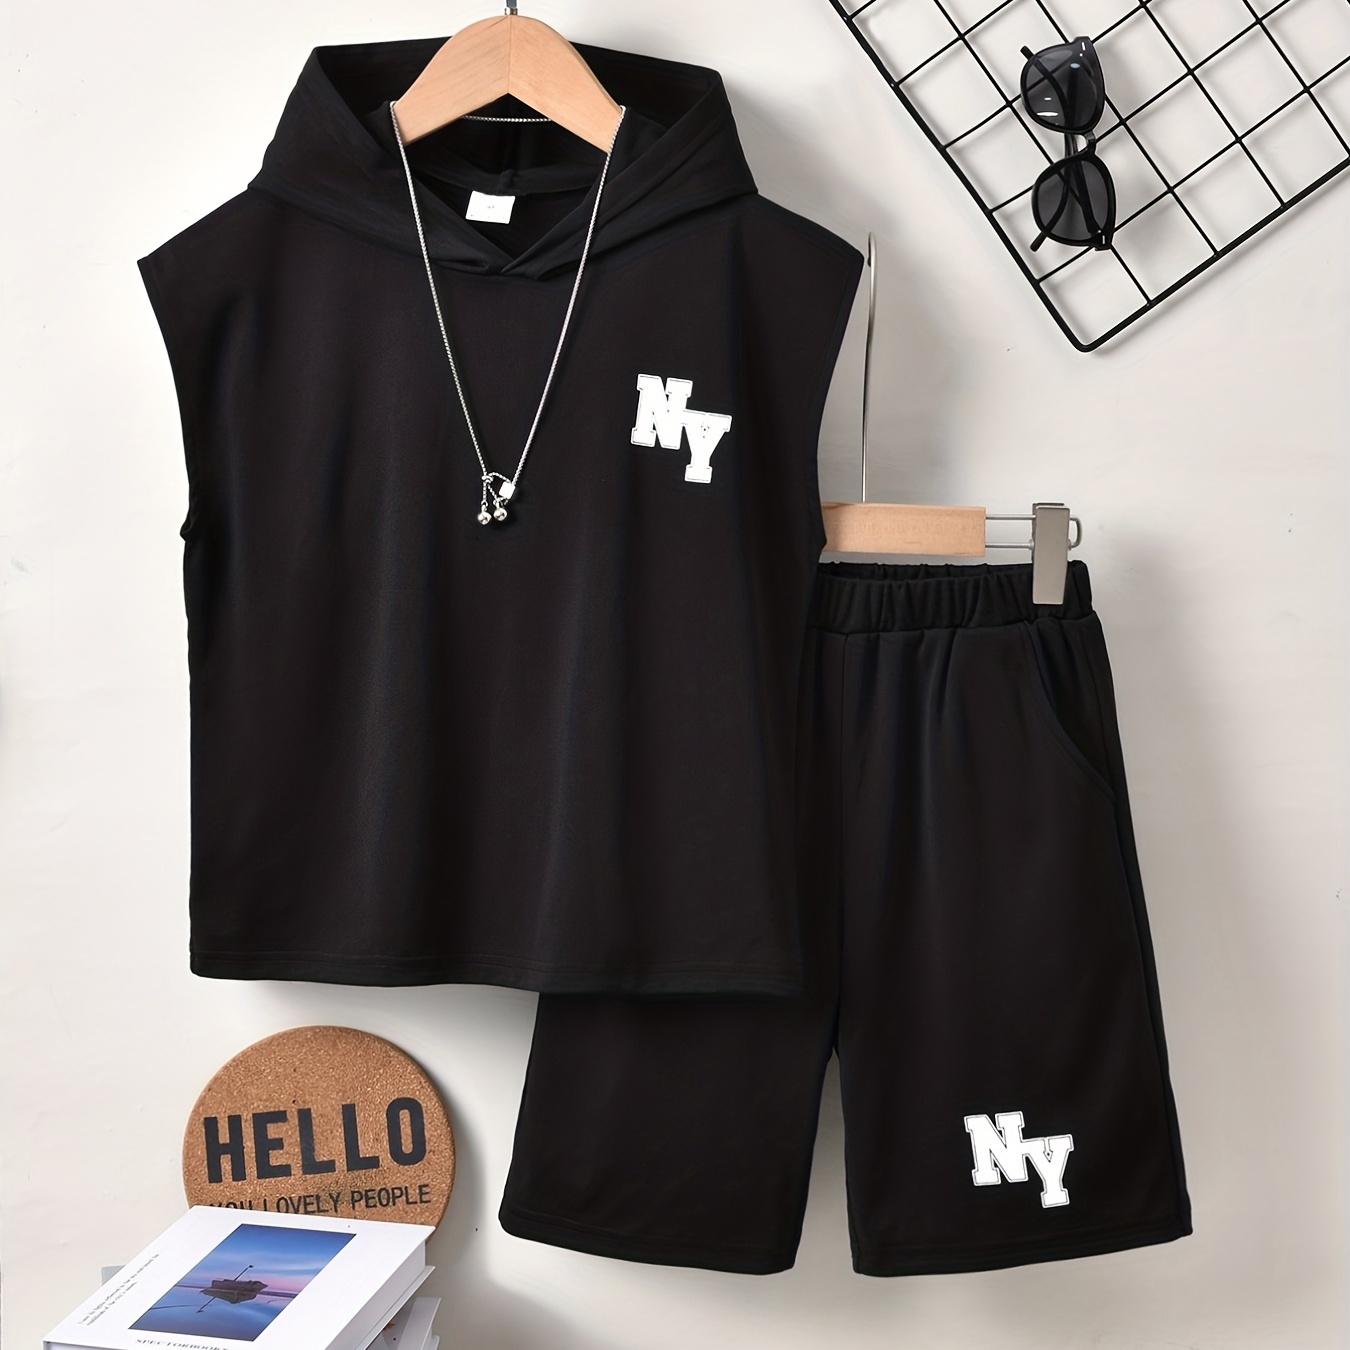 

Boys "ny" Cool Outfit Hooded Tank Top & Shorts Comfortable Breathable For Summer Kids Clothes Sets